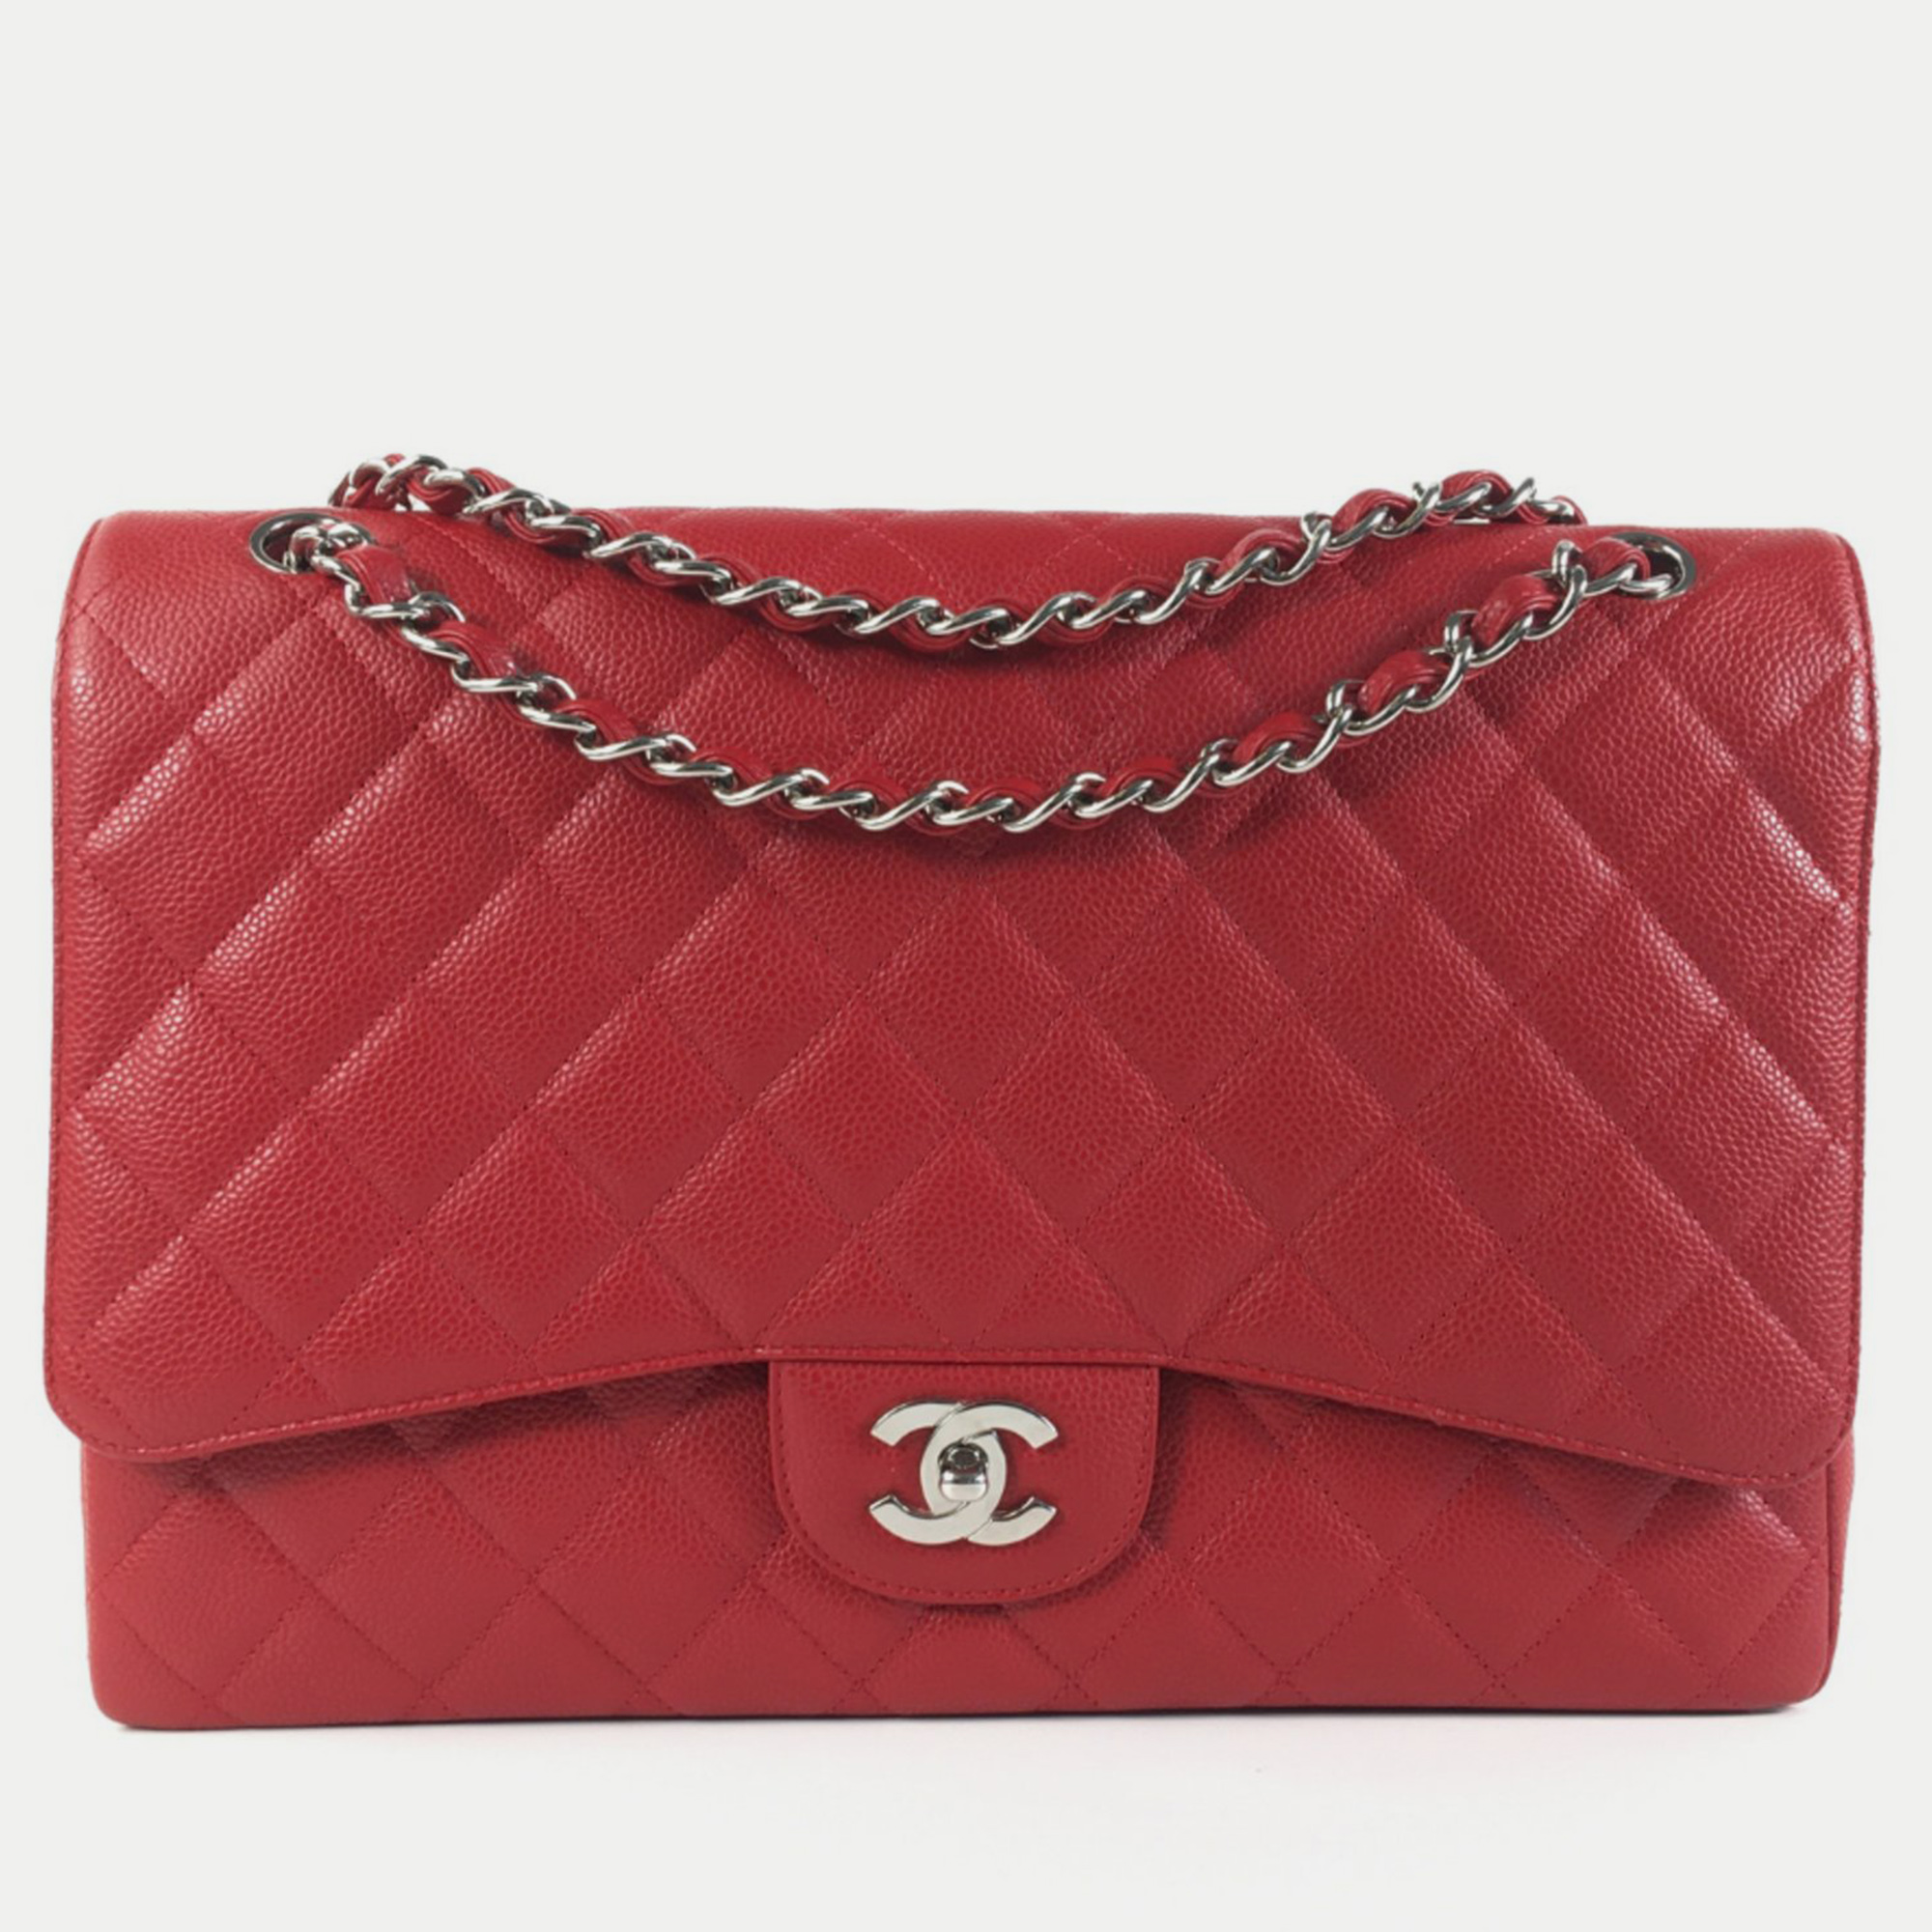 Chanel red lambskin leather maxi classic double flap shoulder bag